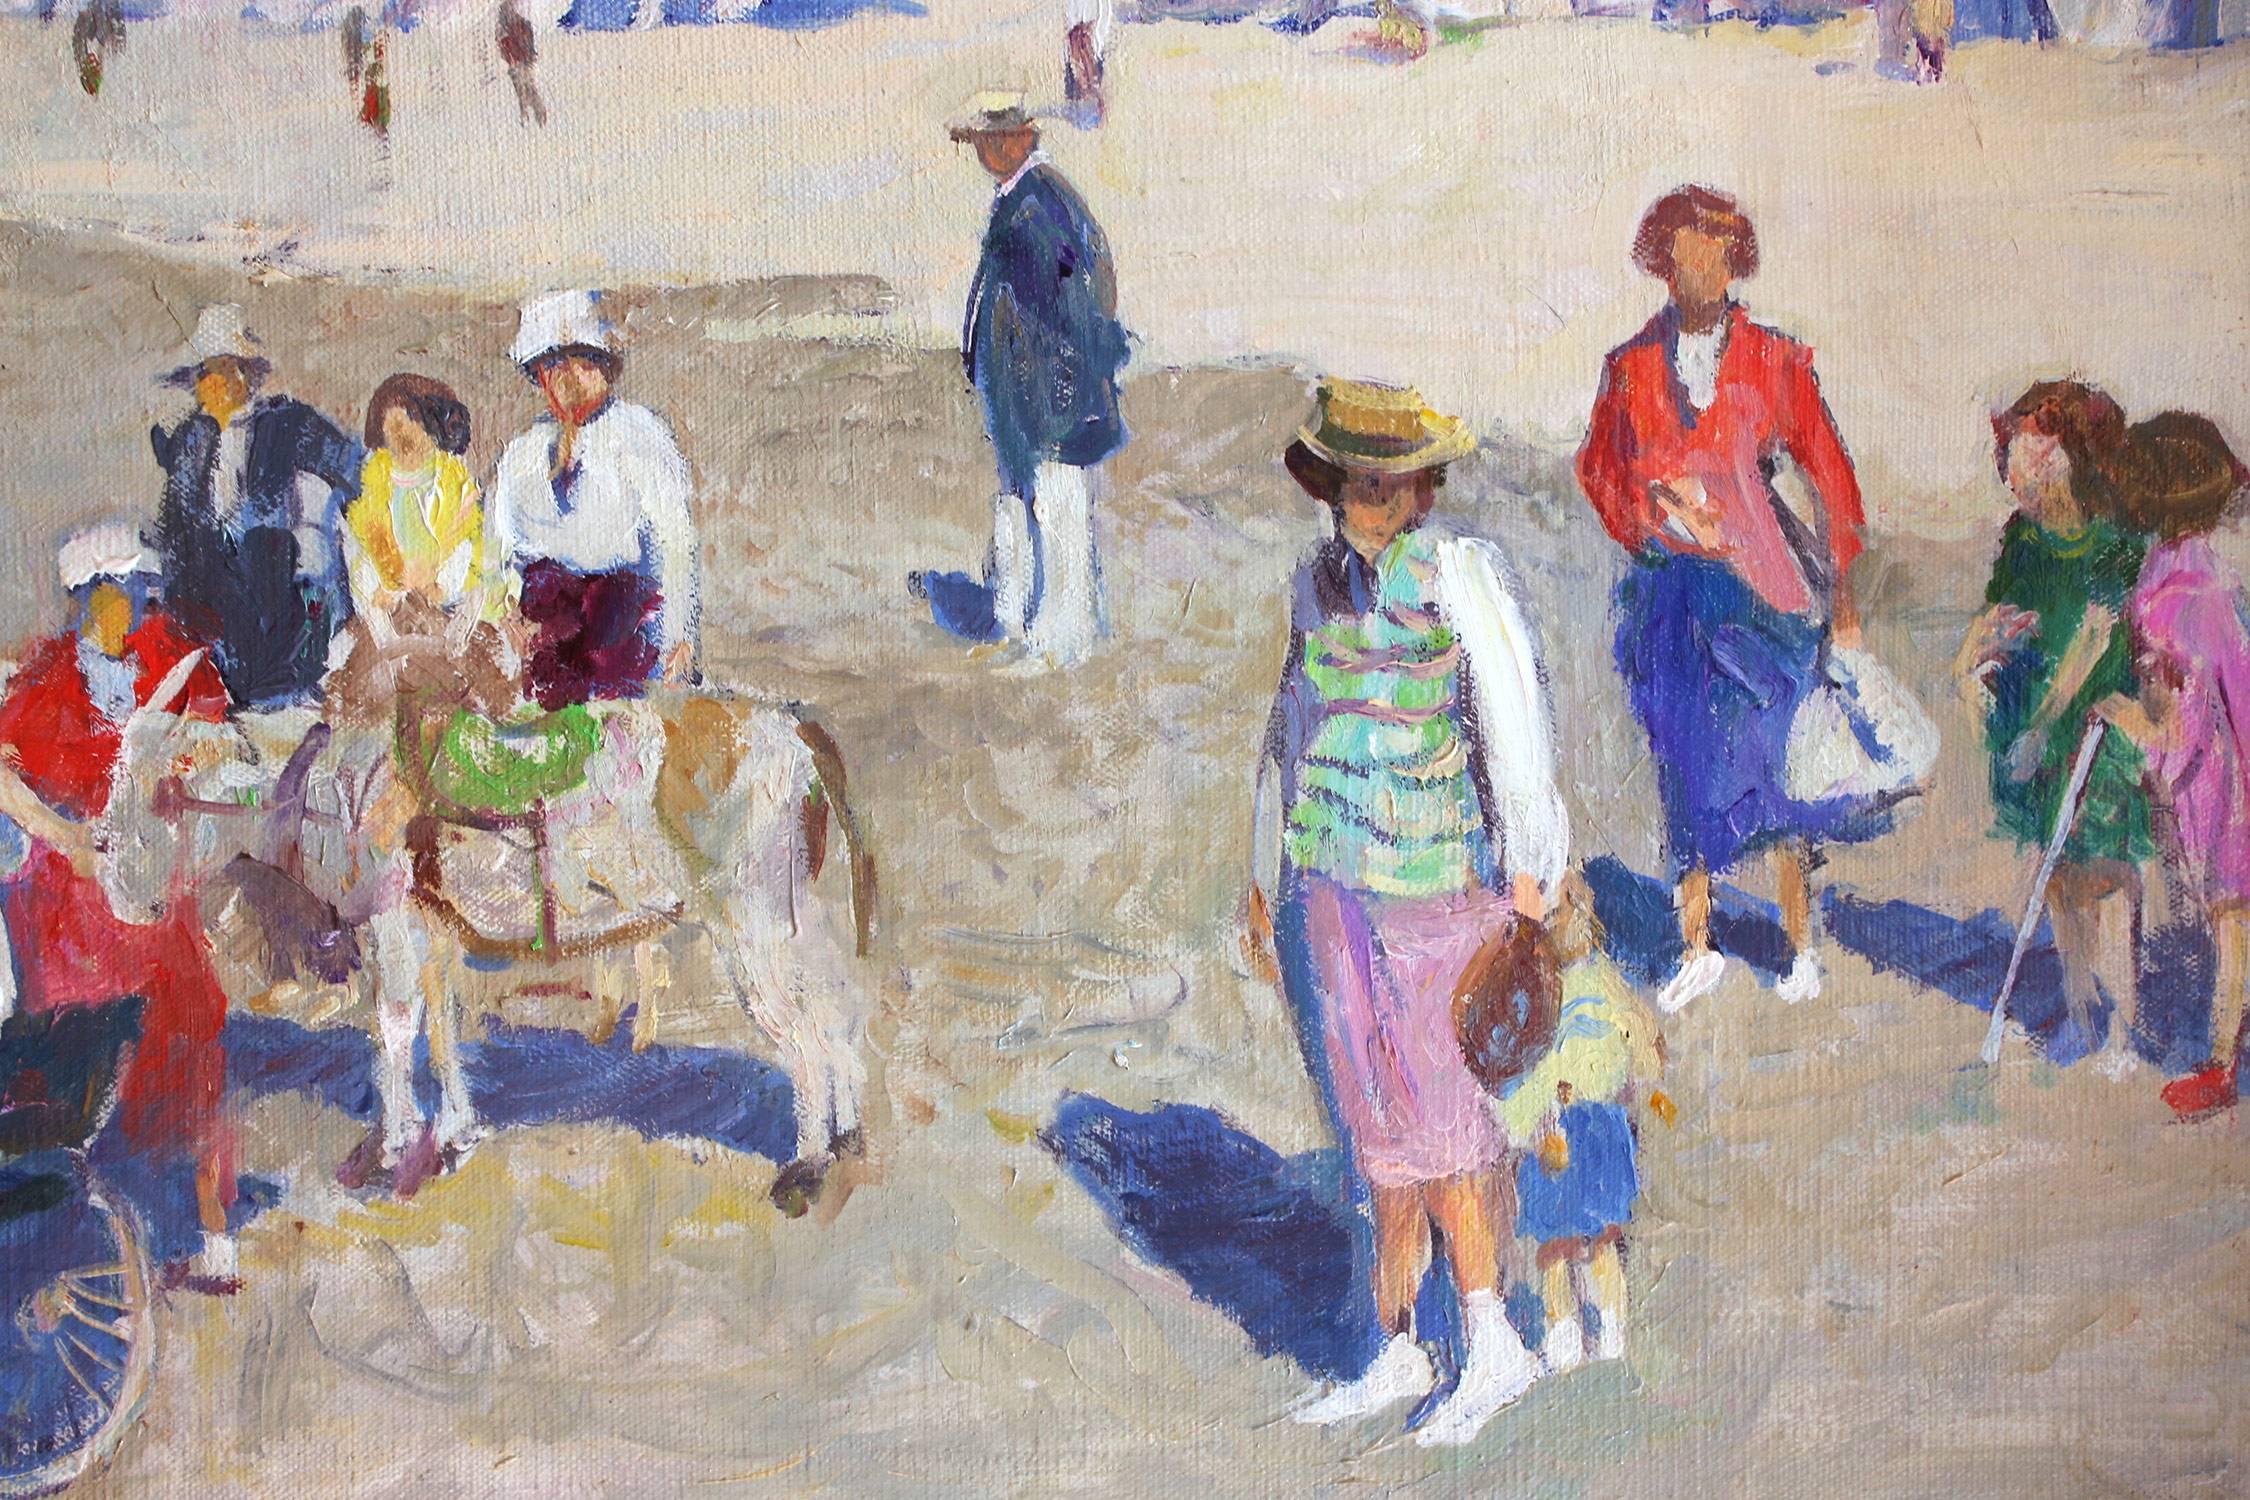 Cote D'Azur Beach Scene - Impressionist Painting by Lucien Adrion